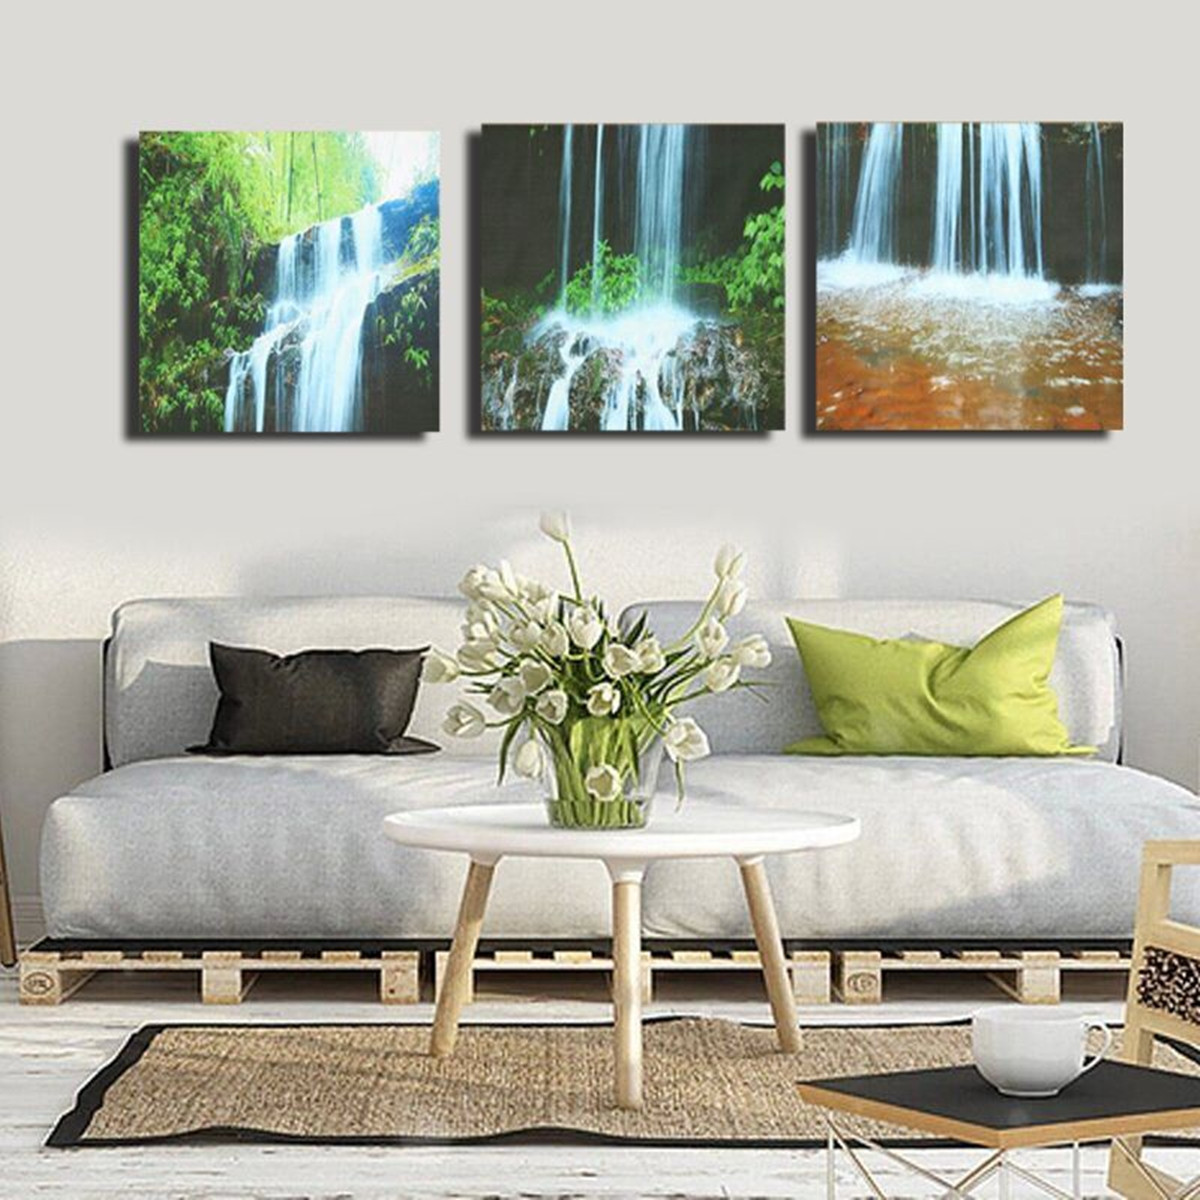 Big Paintings For Living Room
 3 Cascade Waterfall Framed Print Painting Canvas